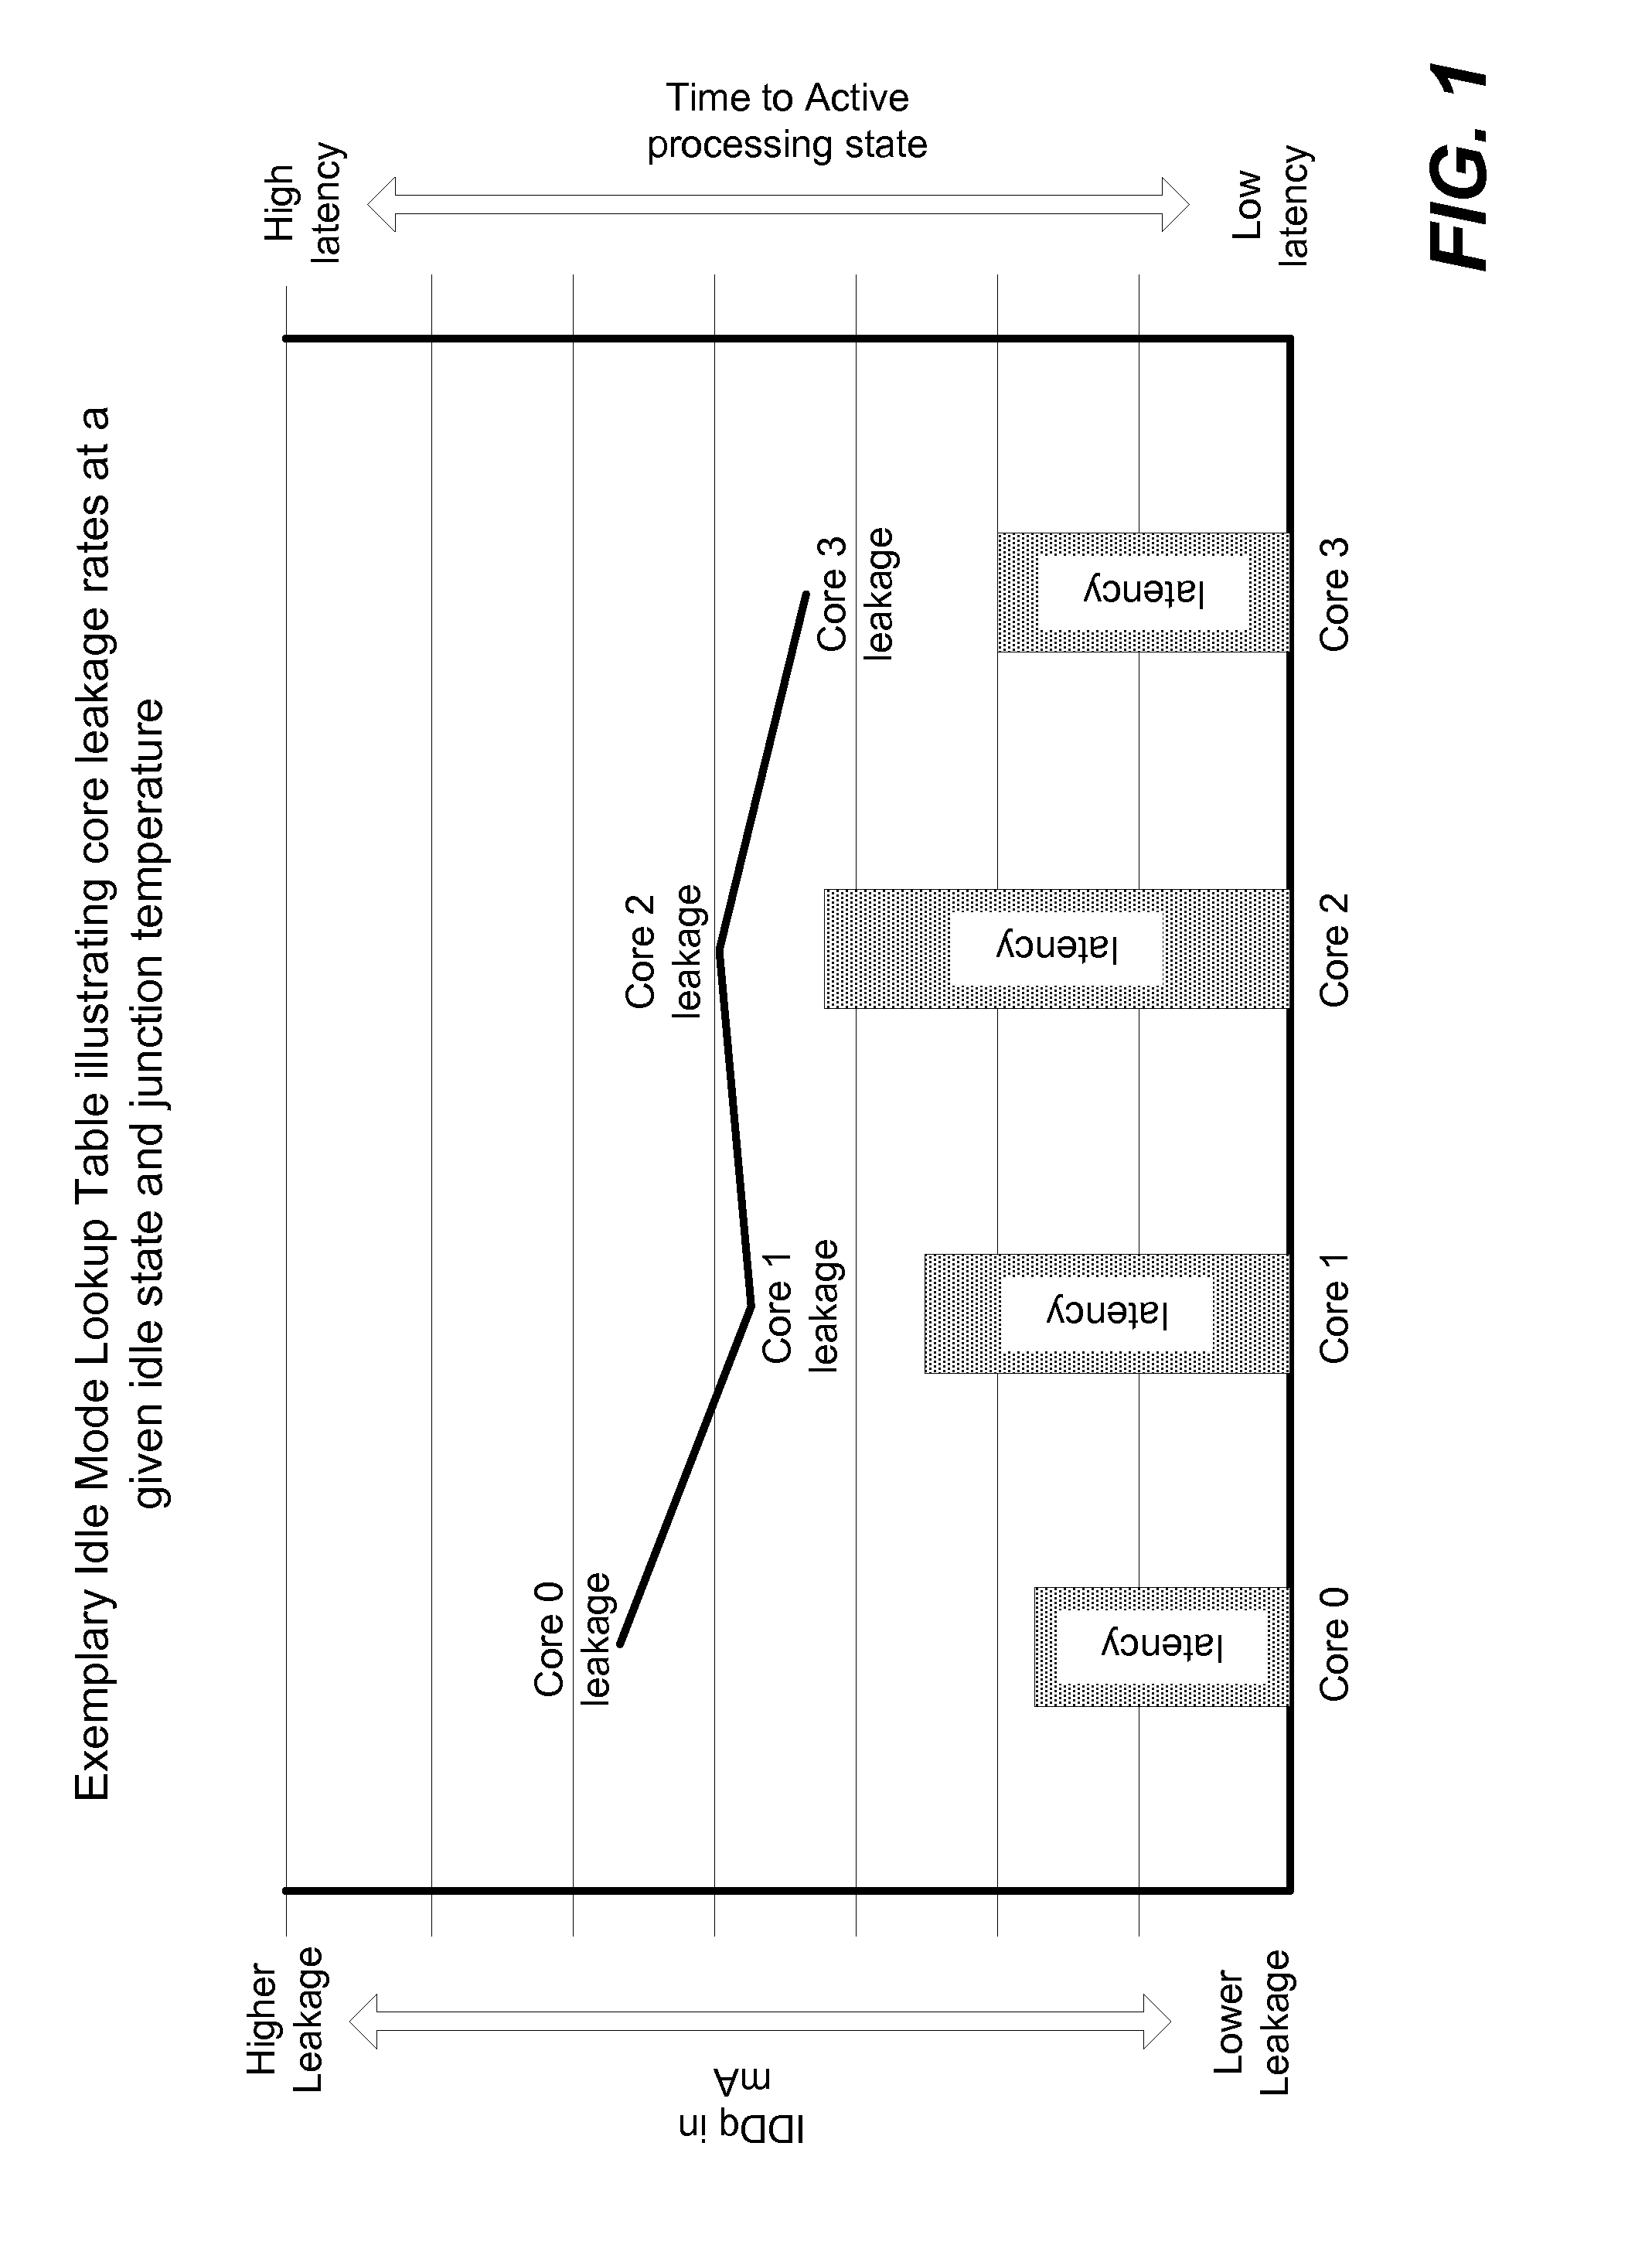 System and method for idle state optimization in a multi-processor system on a chip